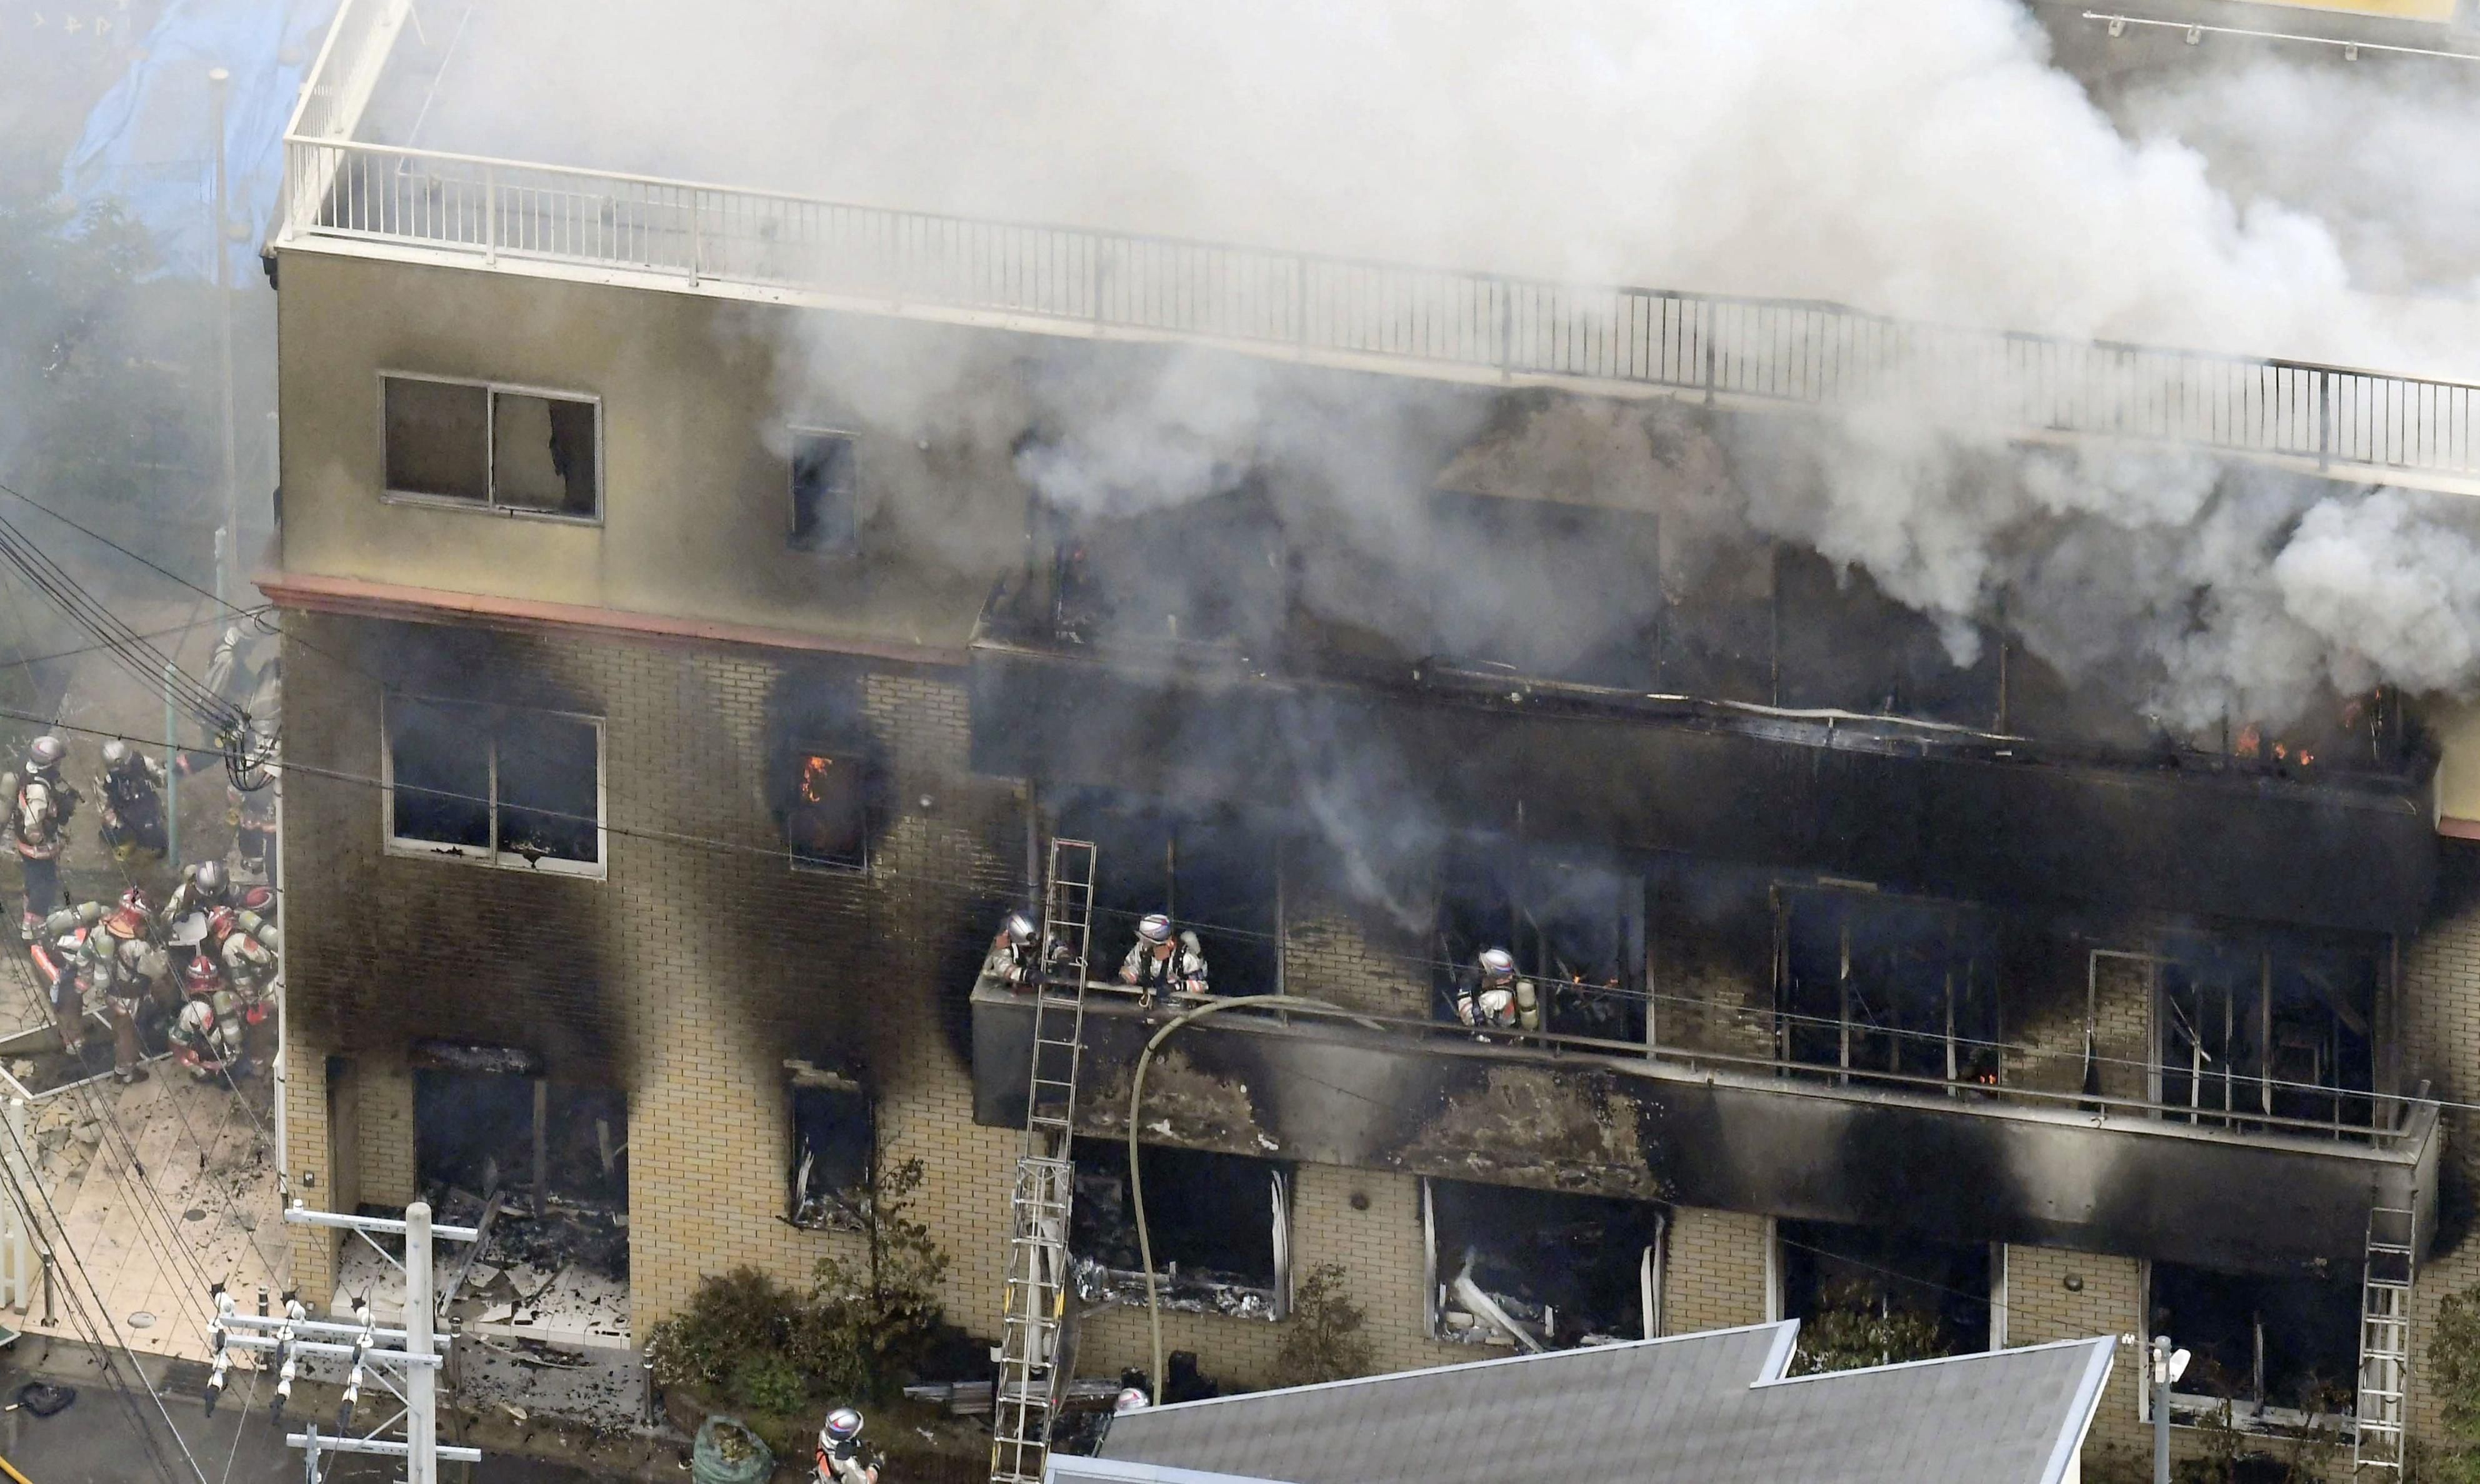 Fatal fire set at anime studio in Kyoto, Japan 